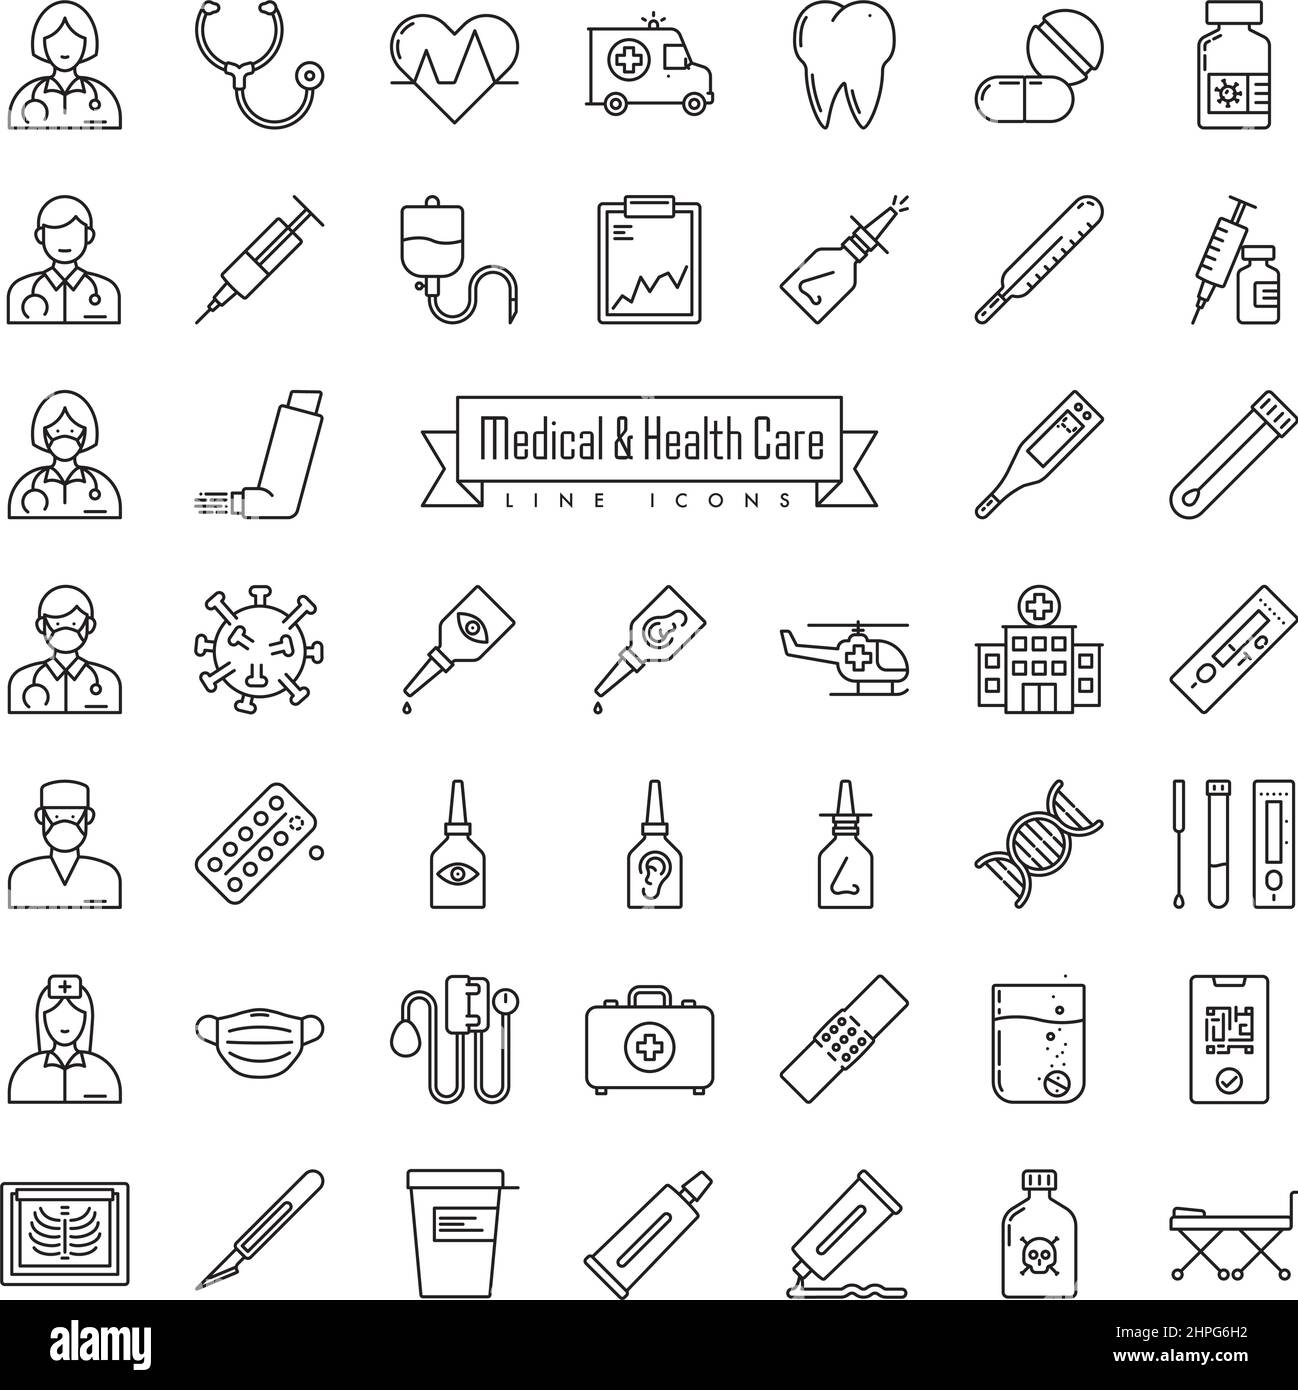 Health Care and Medical Line icon Collection. Outline symbols for medicine, pharmamaceutics, medical equipment and illnesses. Stock Vector